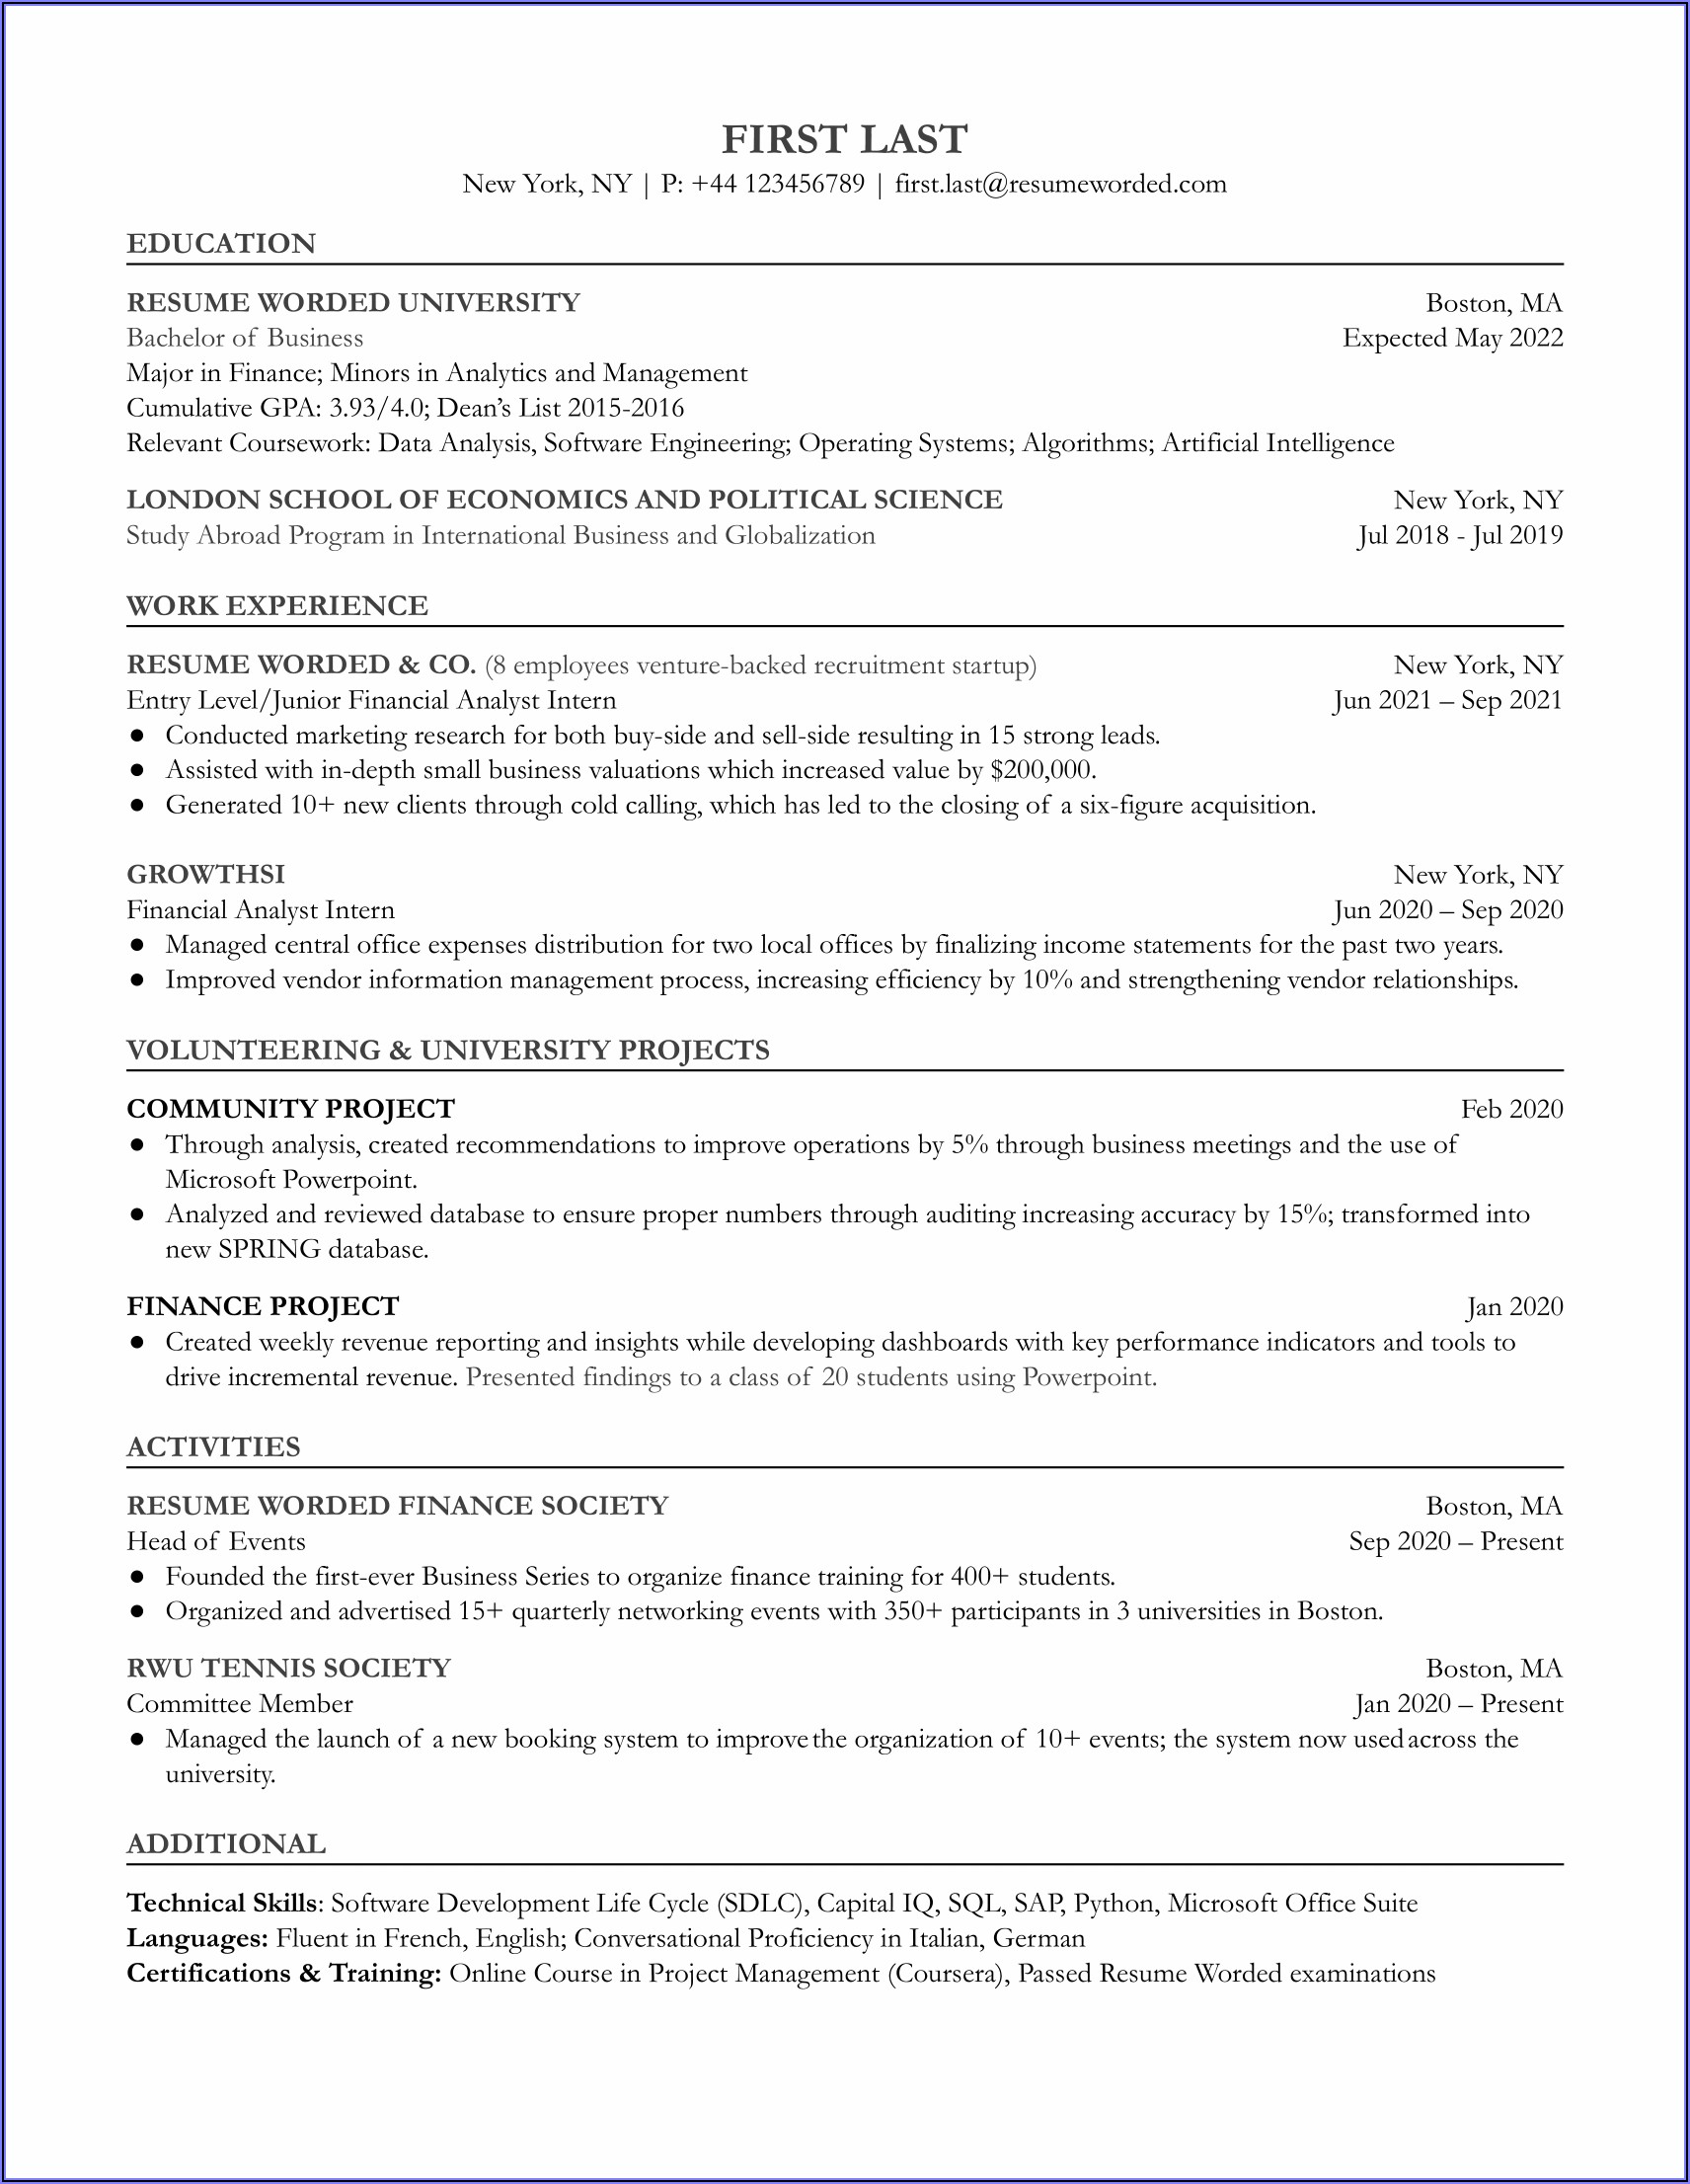 Sample Cover Letter For Entry Level Financial Analyst Position